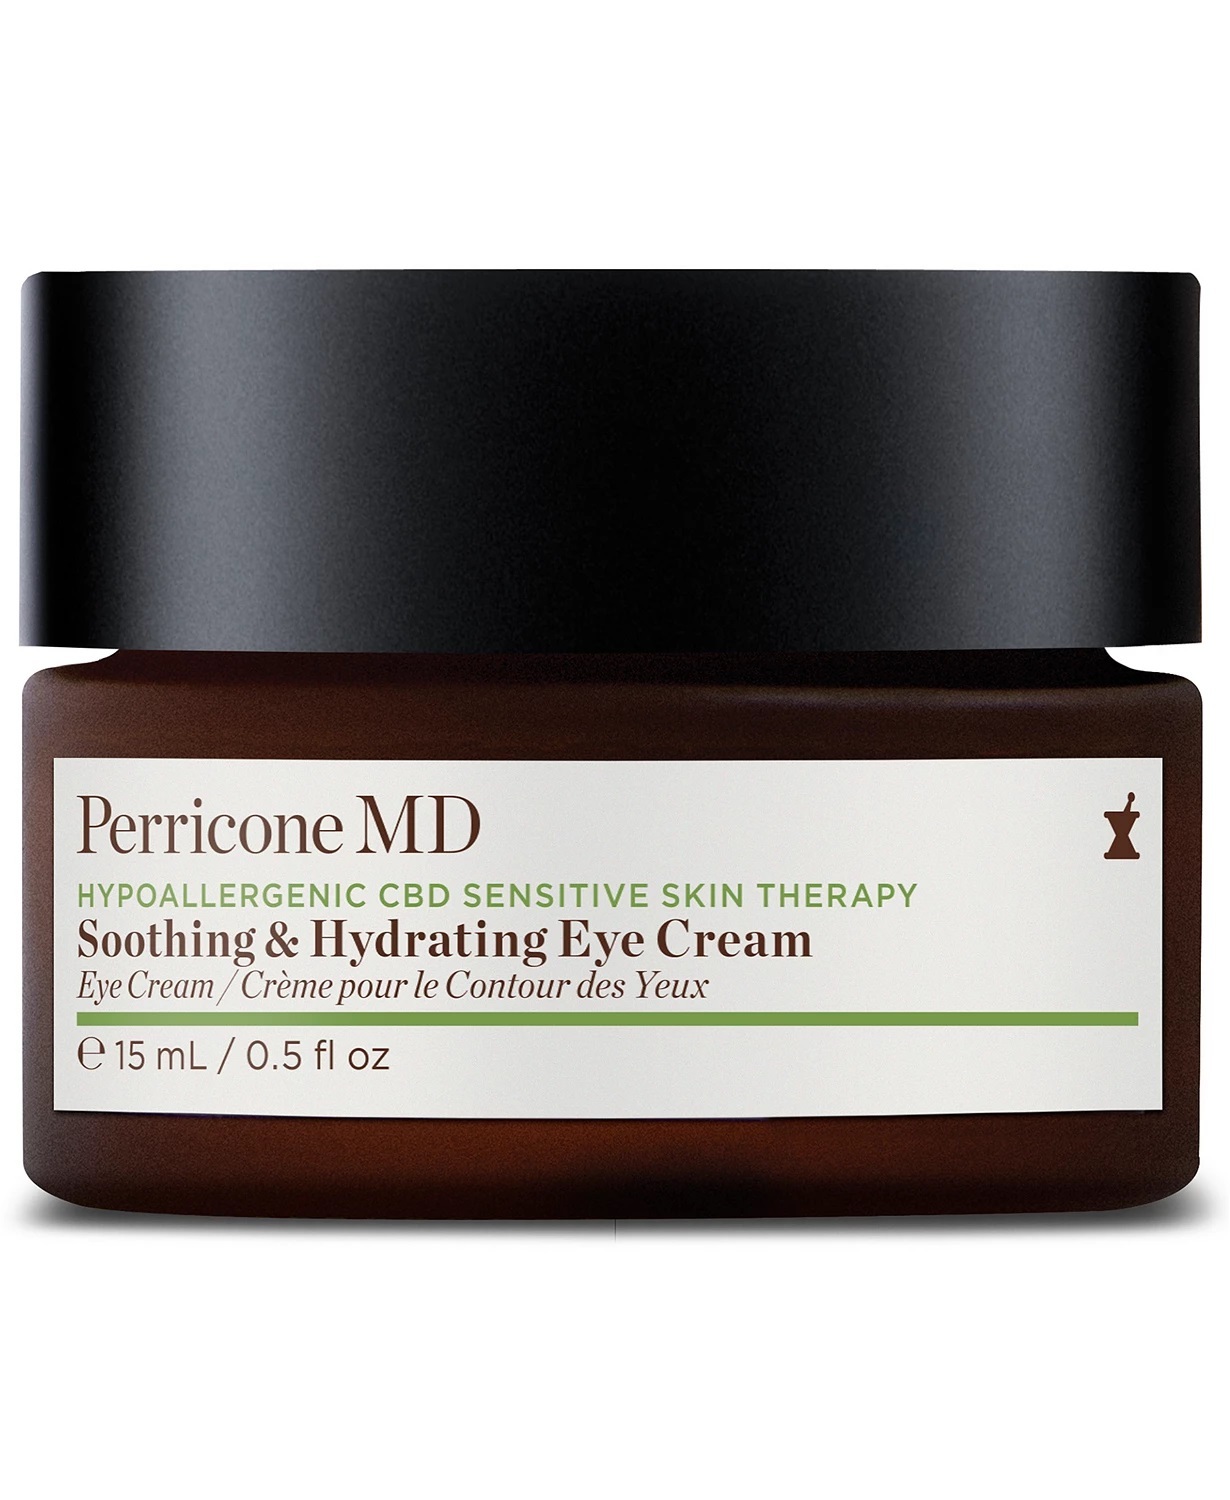 Primary image for Perricone MD Soothing & Hydrating Eye Cream 0.5 oz